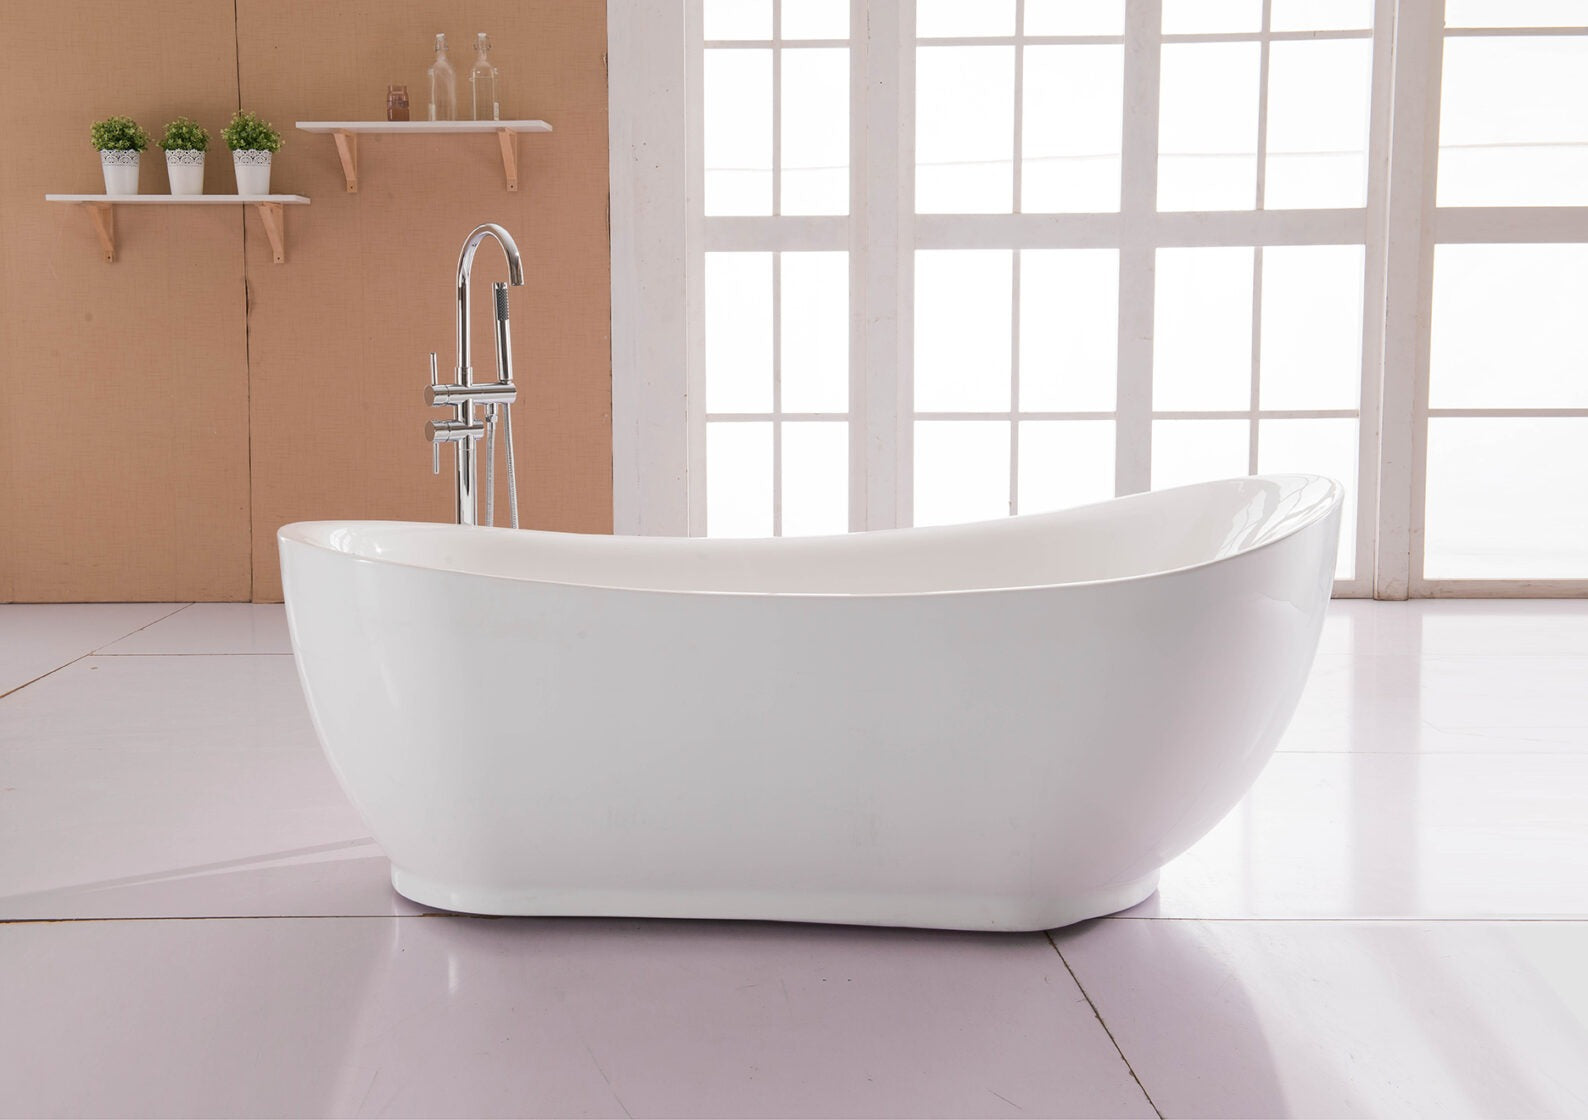 RIVA BELLA FREESTANDING BATHTUB GLOSS WHITE (AVAILABLE IN 1500MM AND 1700MM)